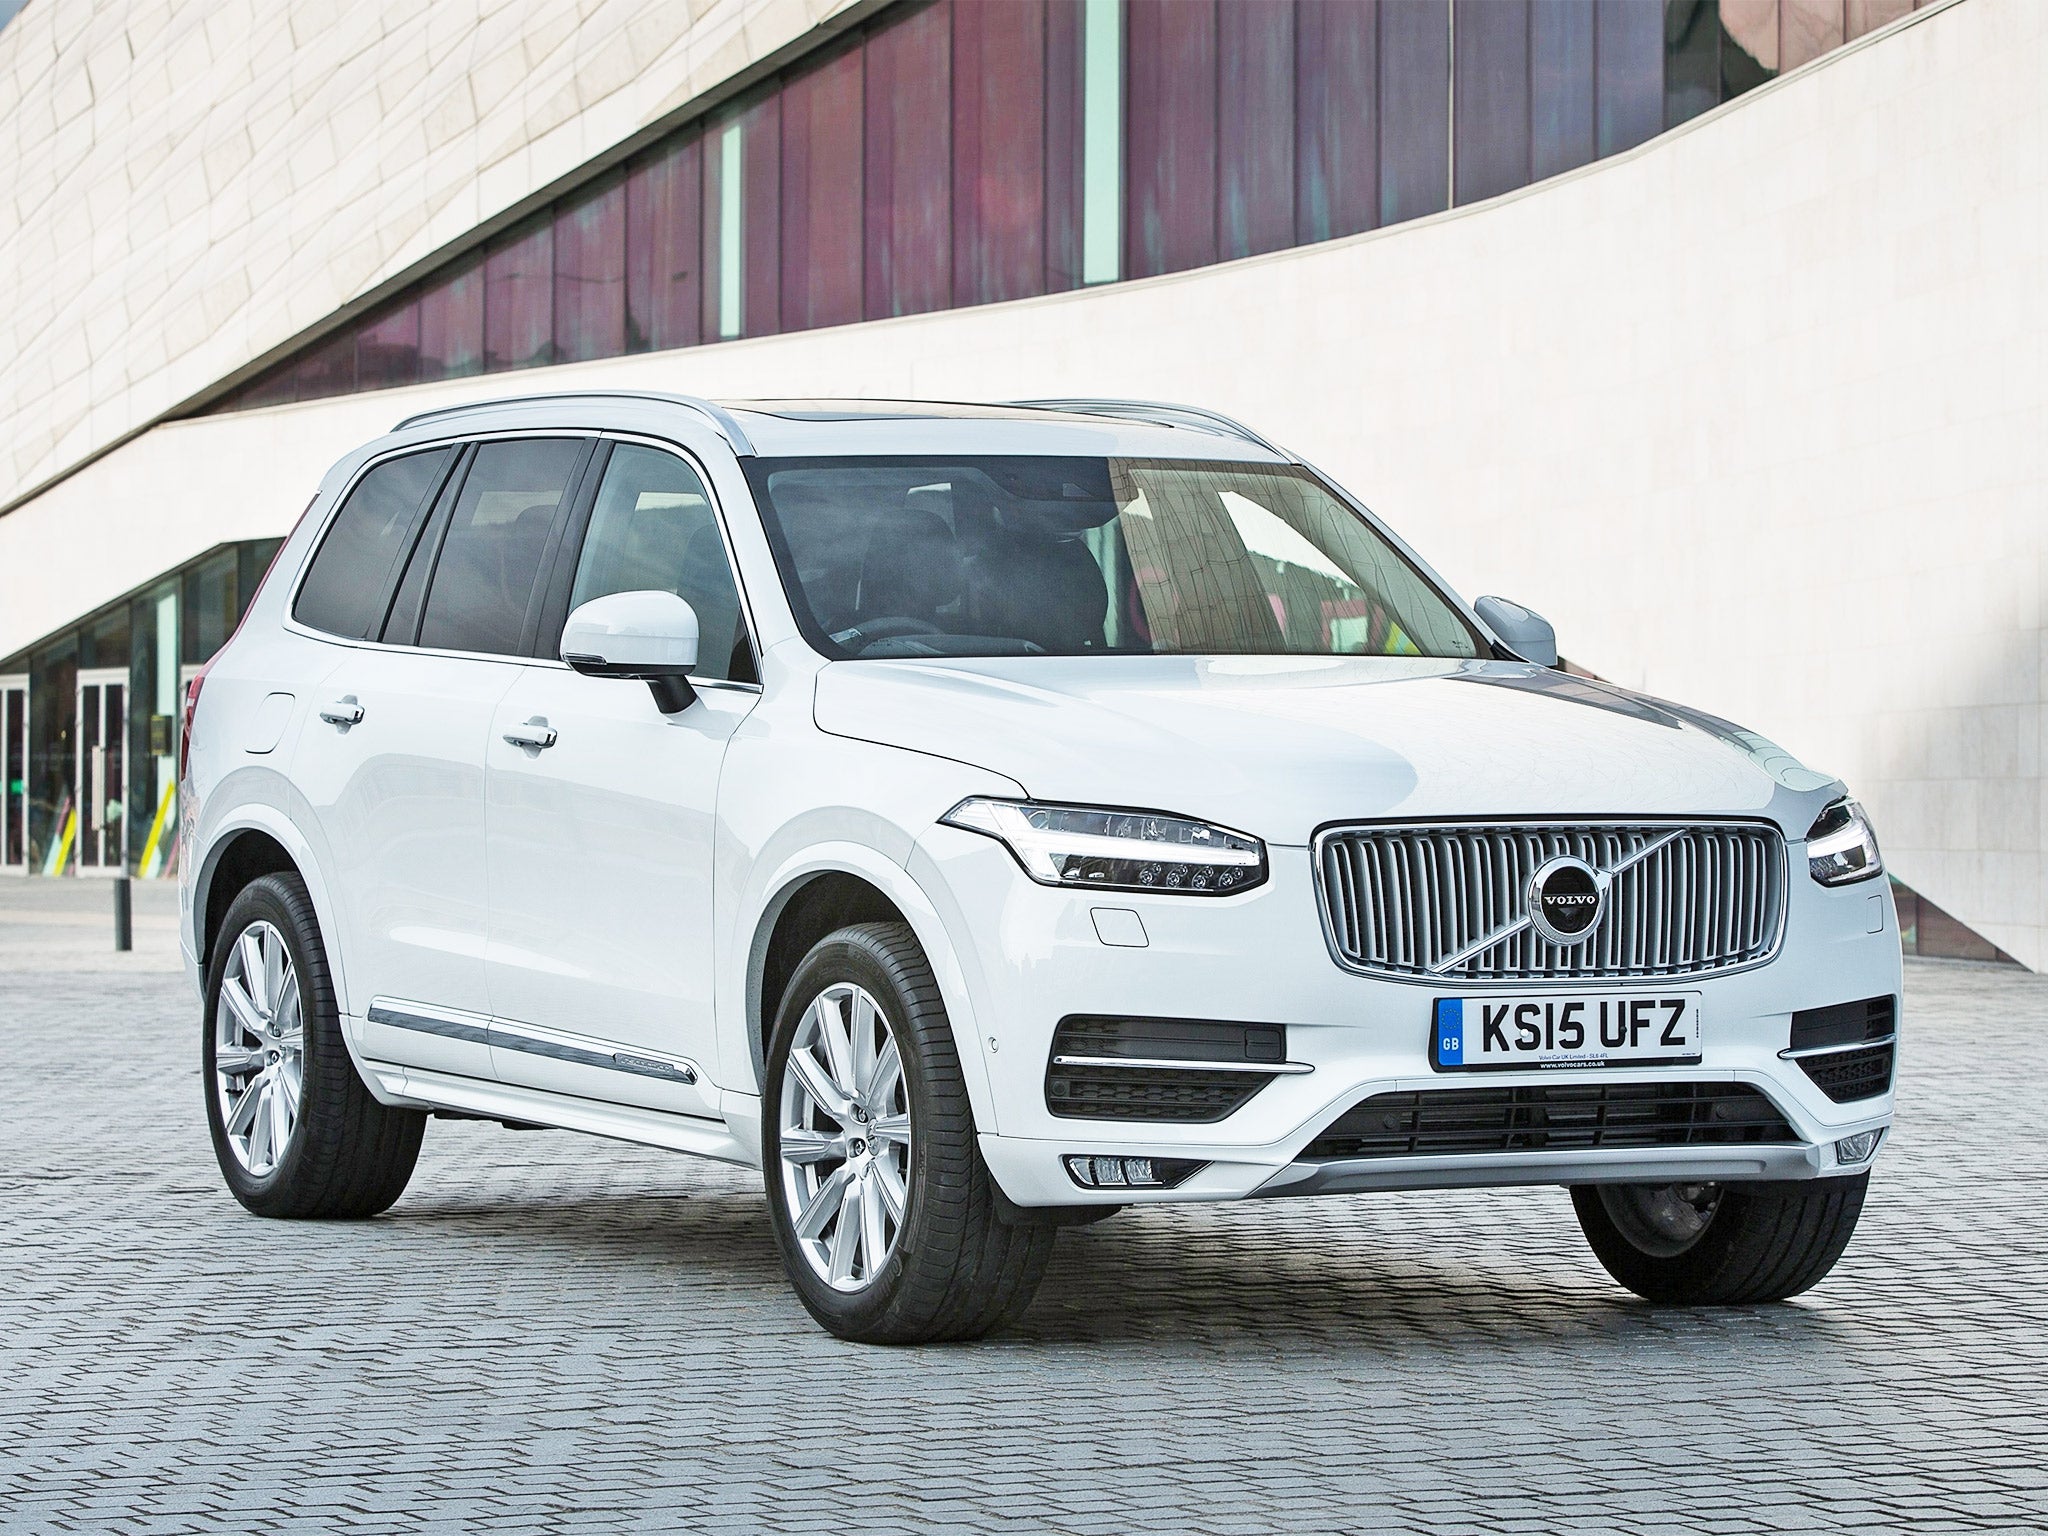 Safety first: the new Volvo XC90